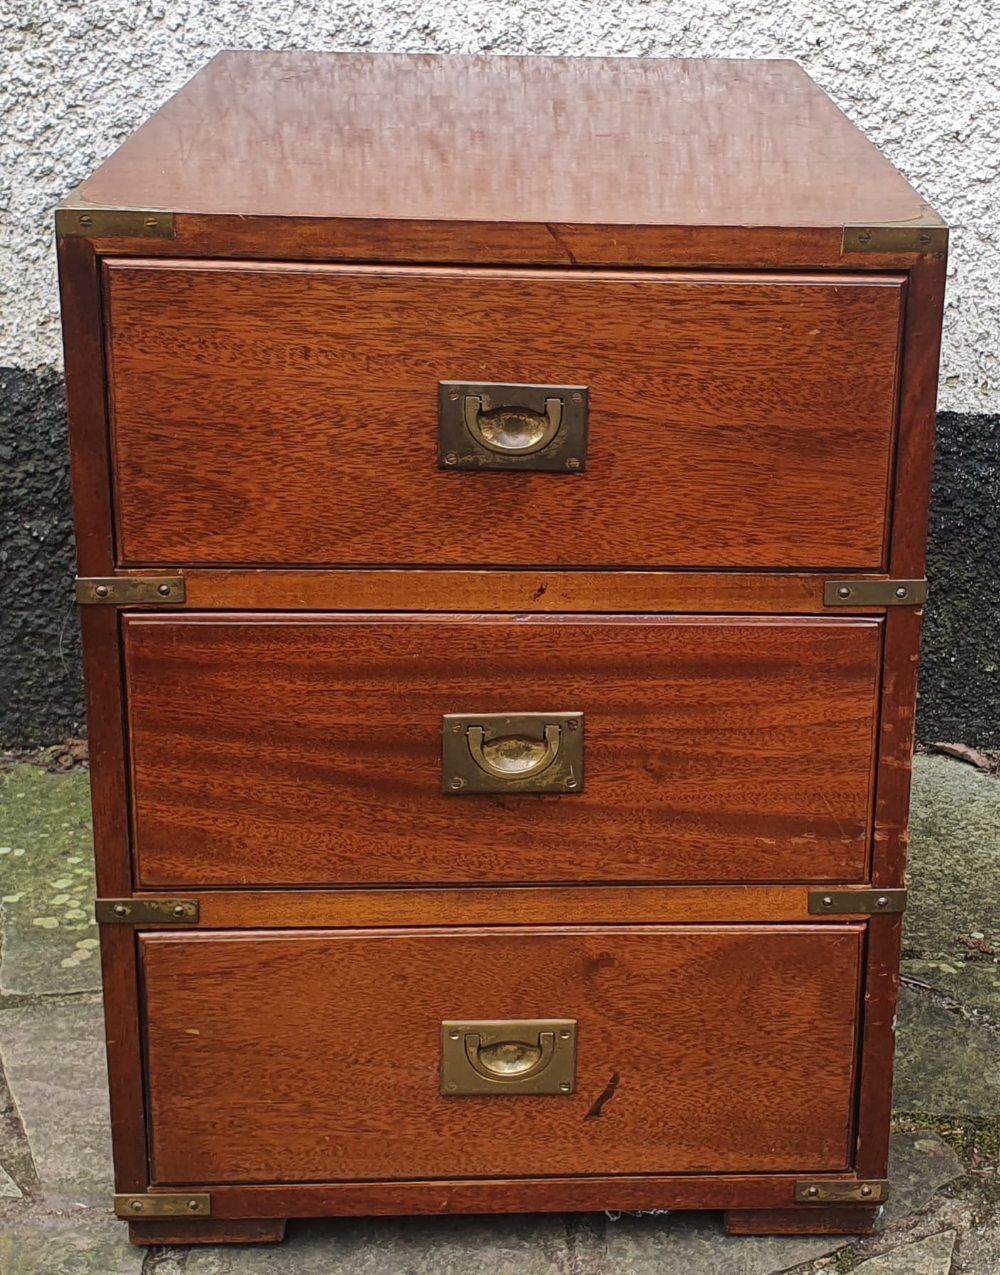 A reproduction campaign style three-drawer chest, 16" wide. - Image 2 of 3